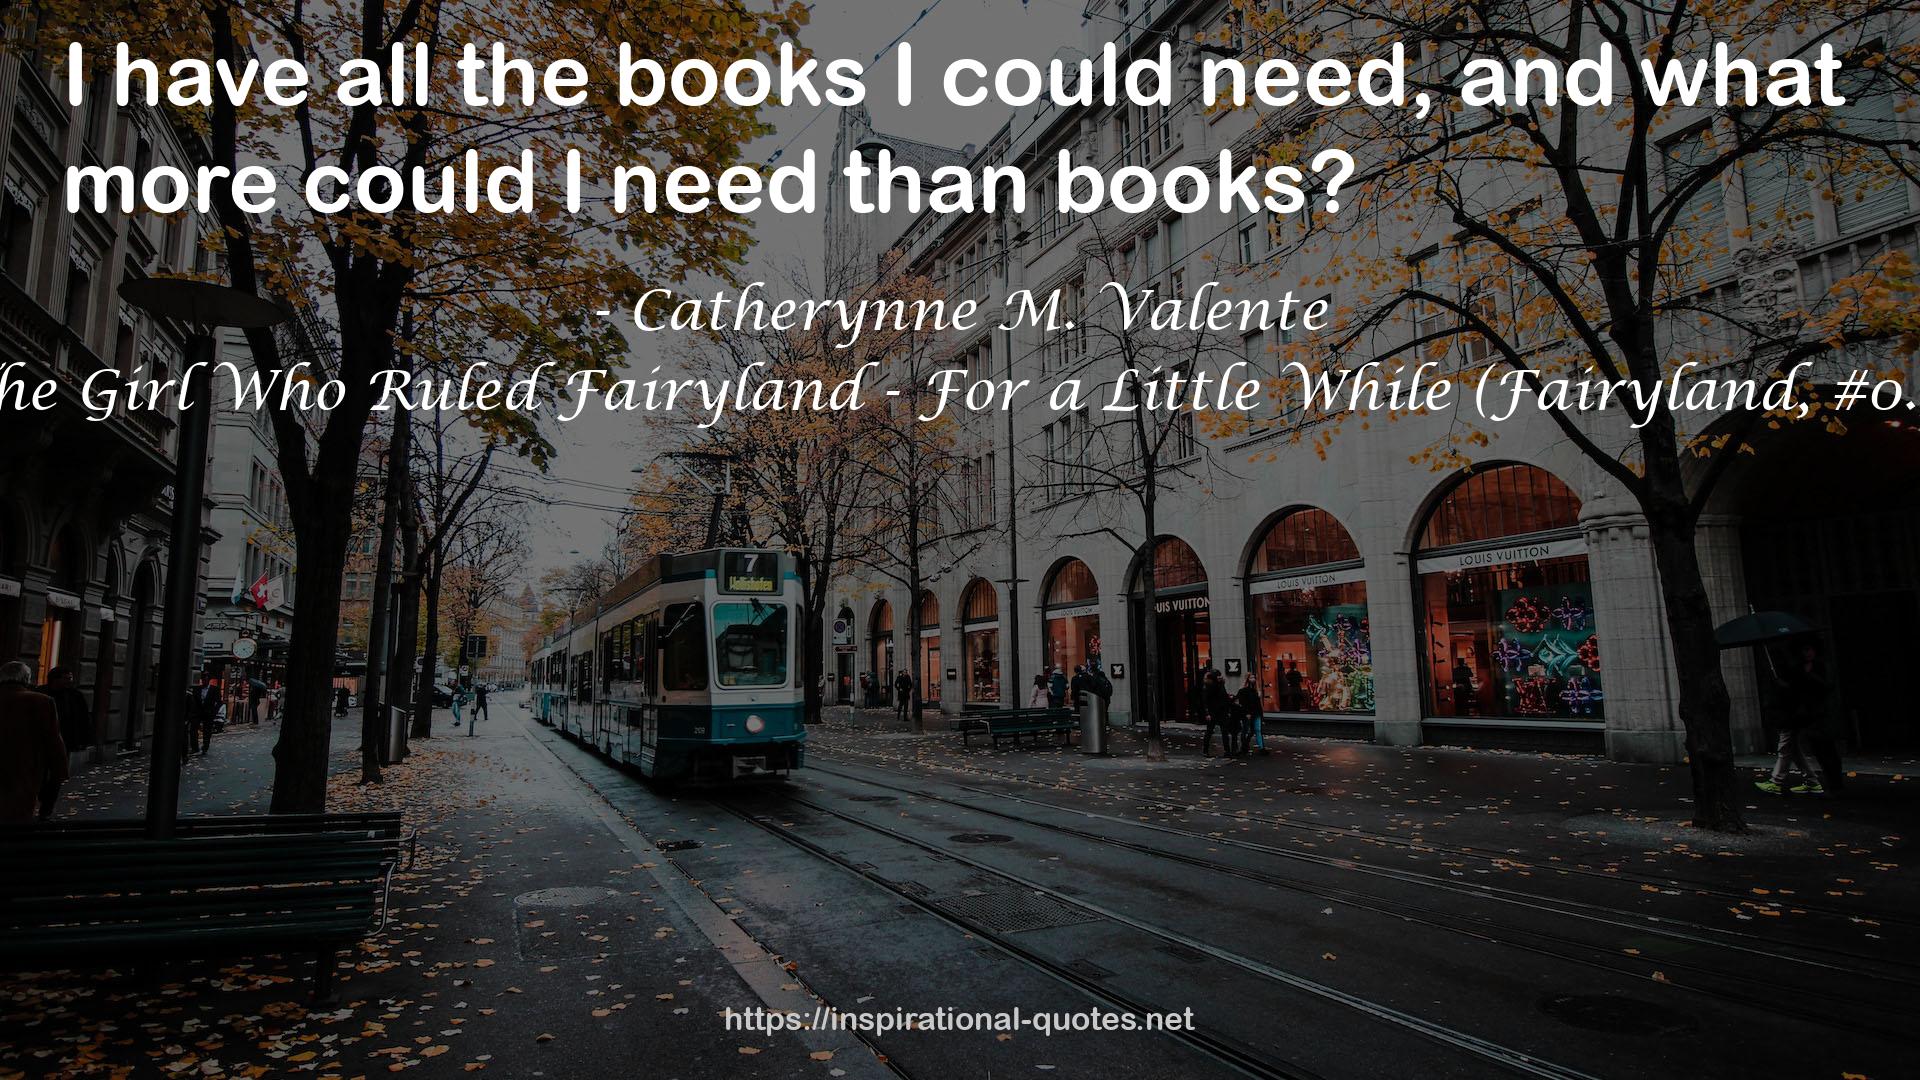 The Girl Who Ruled Fairyland - For a Little While (Fairyland, #0.5) QUOTES